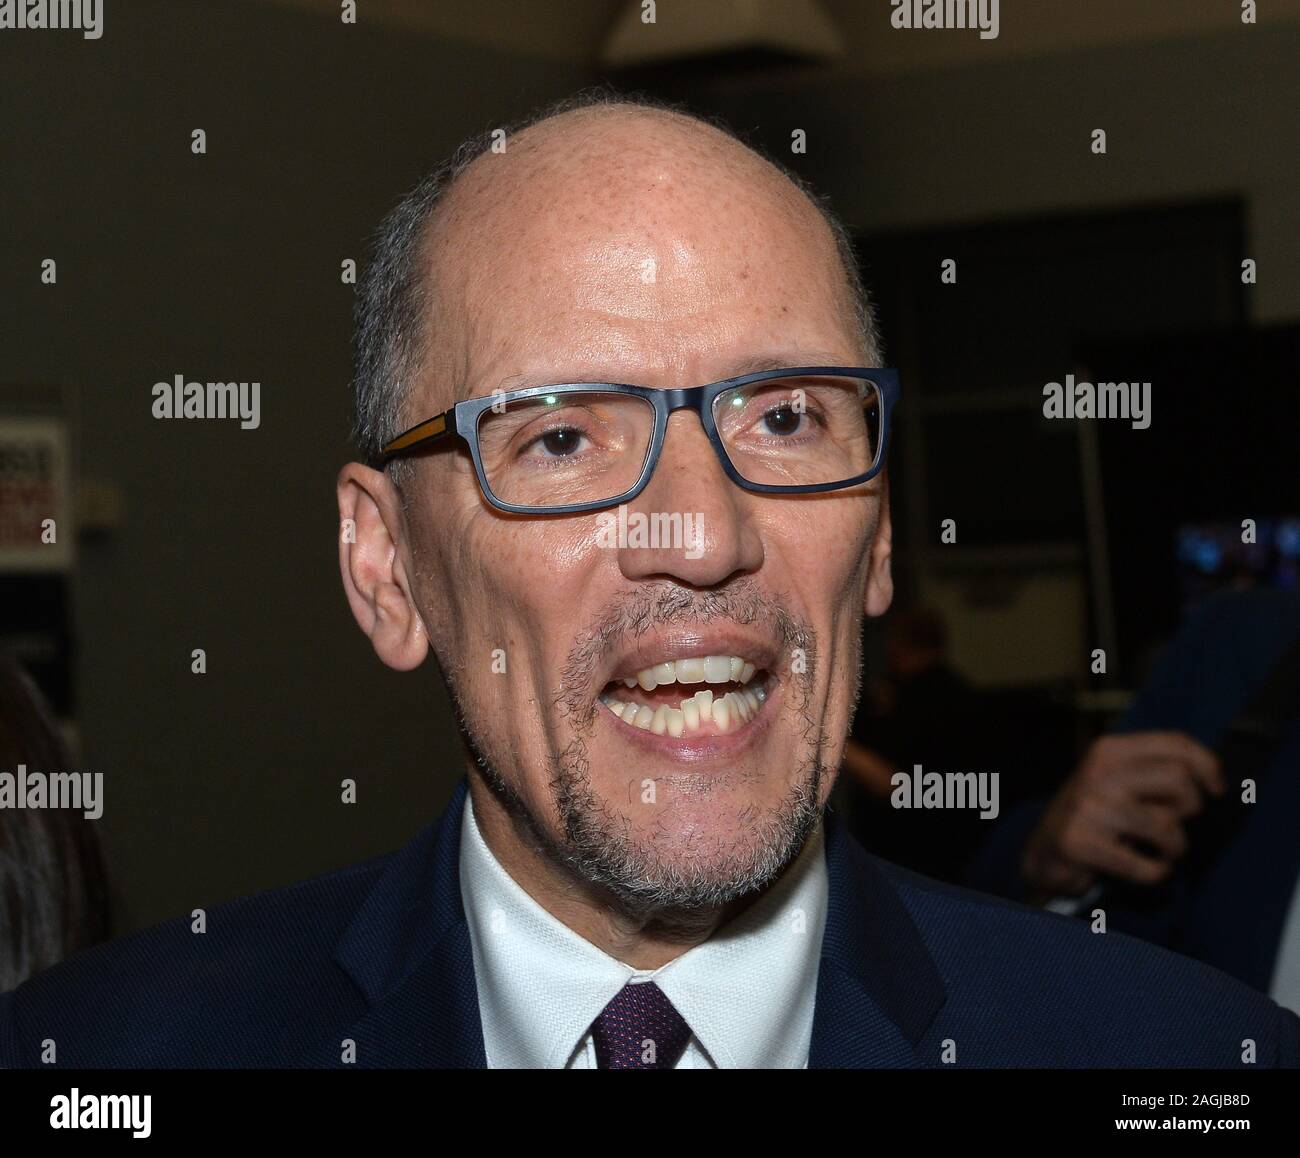 Los Angeles, United States. 19th Dec, 2019. Chair of the Democratic National Committee Tom Perez speaks with reporters prior to the sixth Democratic presidential debate at Loyola Marymount University on Thursday, December 19, 2019 in Los Angeles. Photo by Jim RuymenUPI Credit: UPI/Alamy Live News Stock Photo